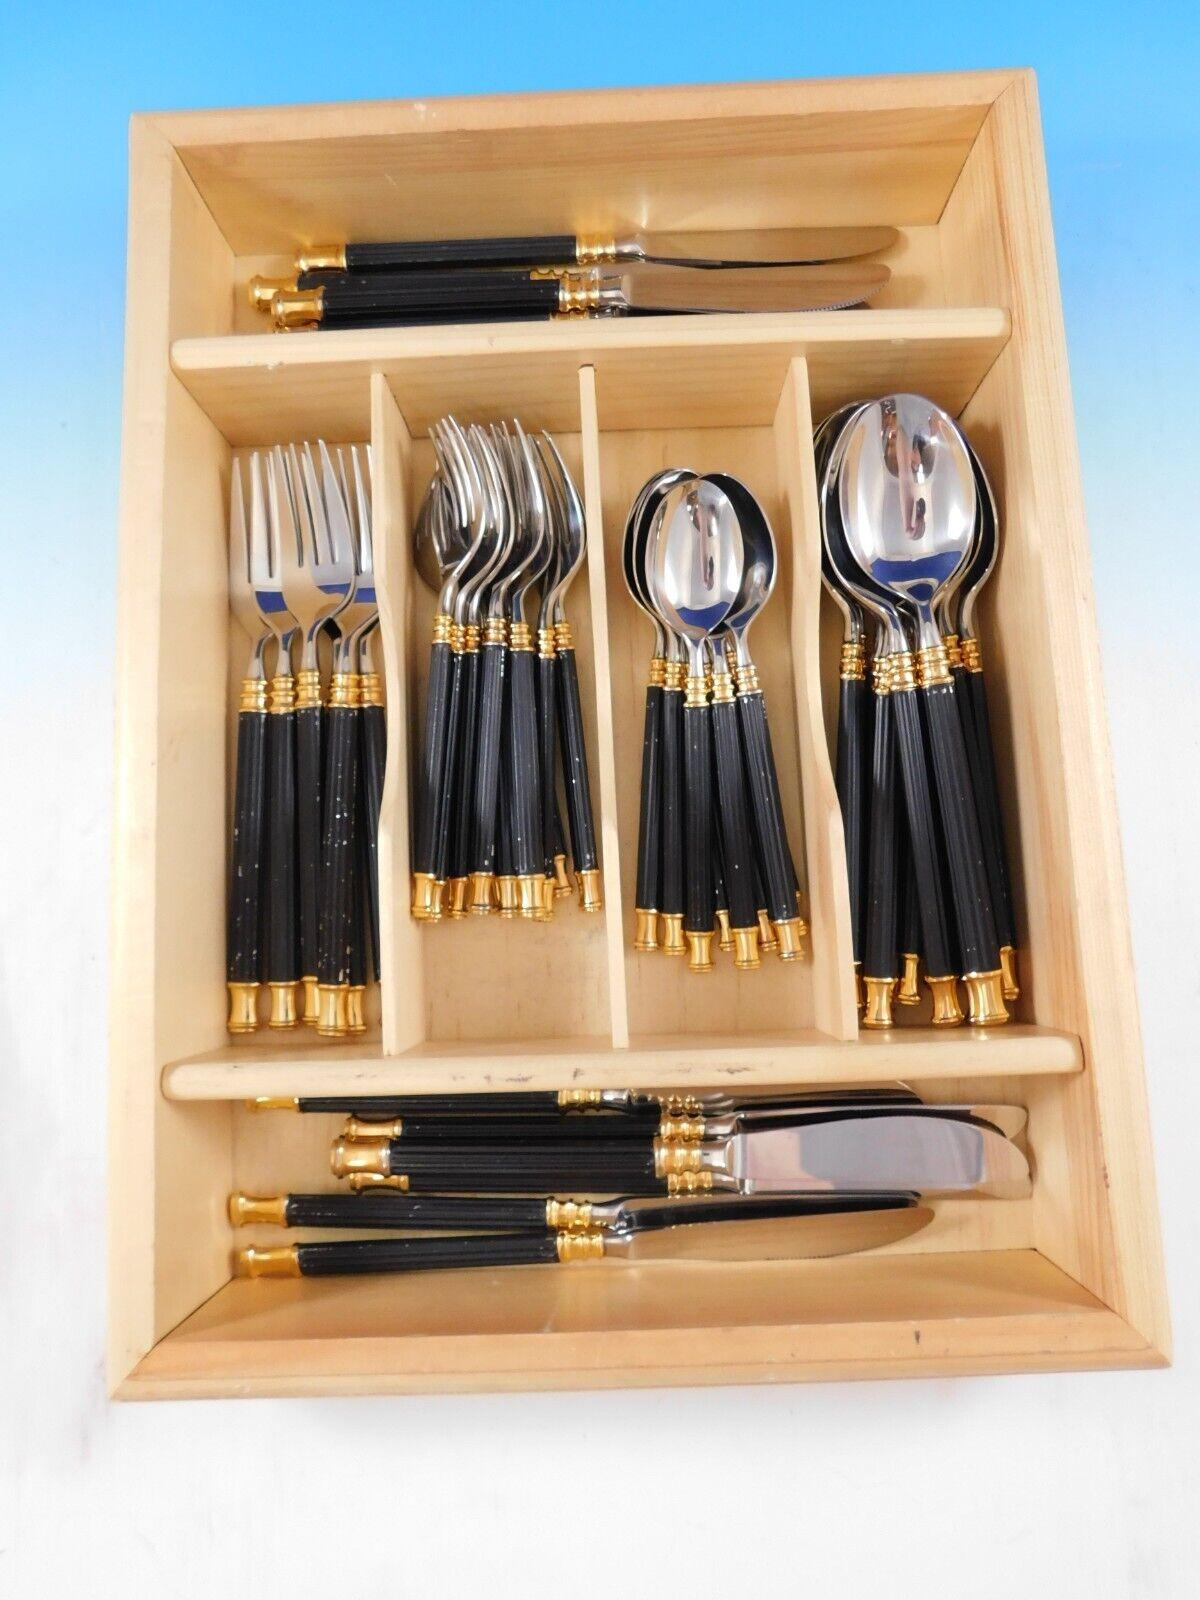 Tucano black with gold accent by Sasaki Japan estate stainless steel flatware set, 50 pieces. This set includes:

12 knives, 8 3/4